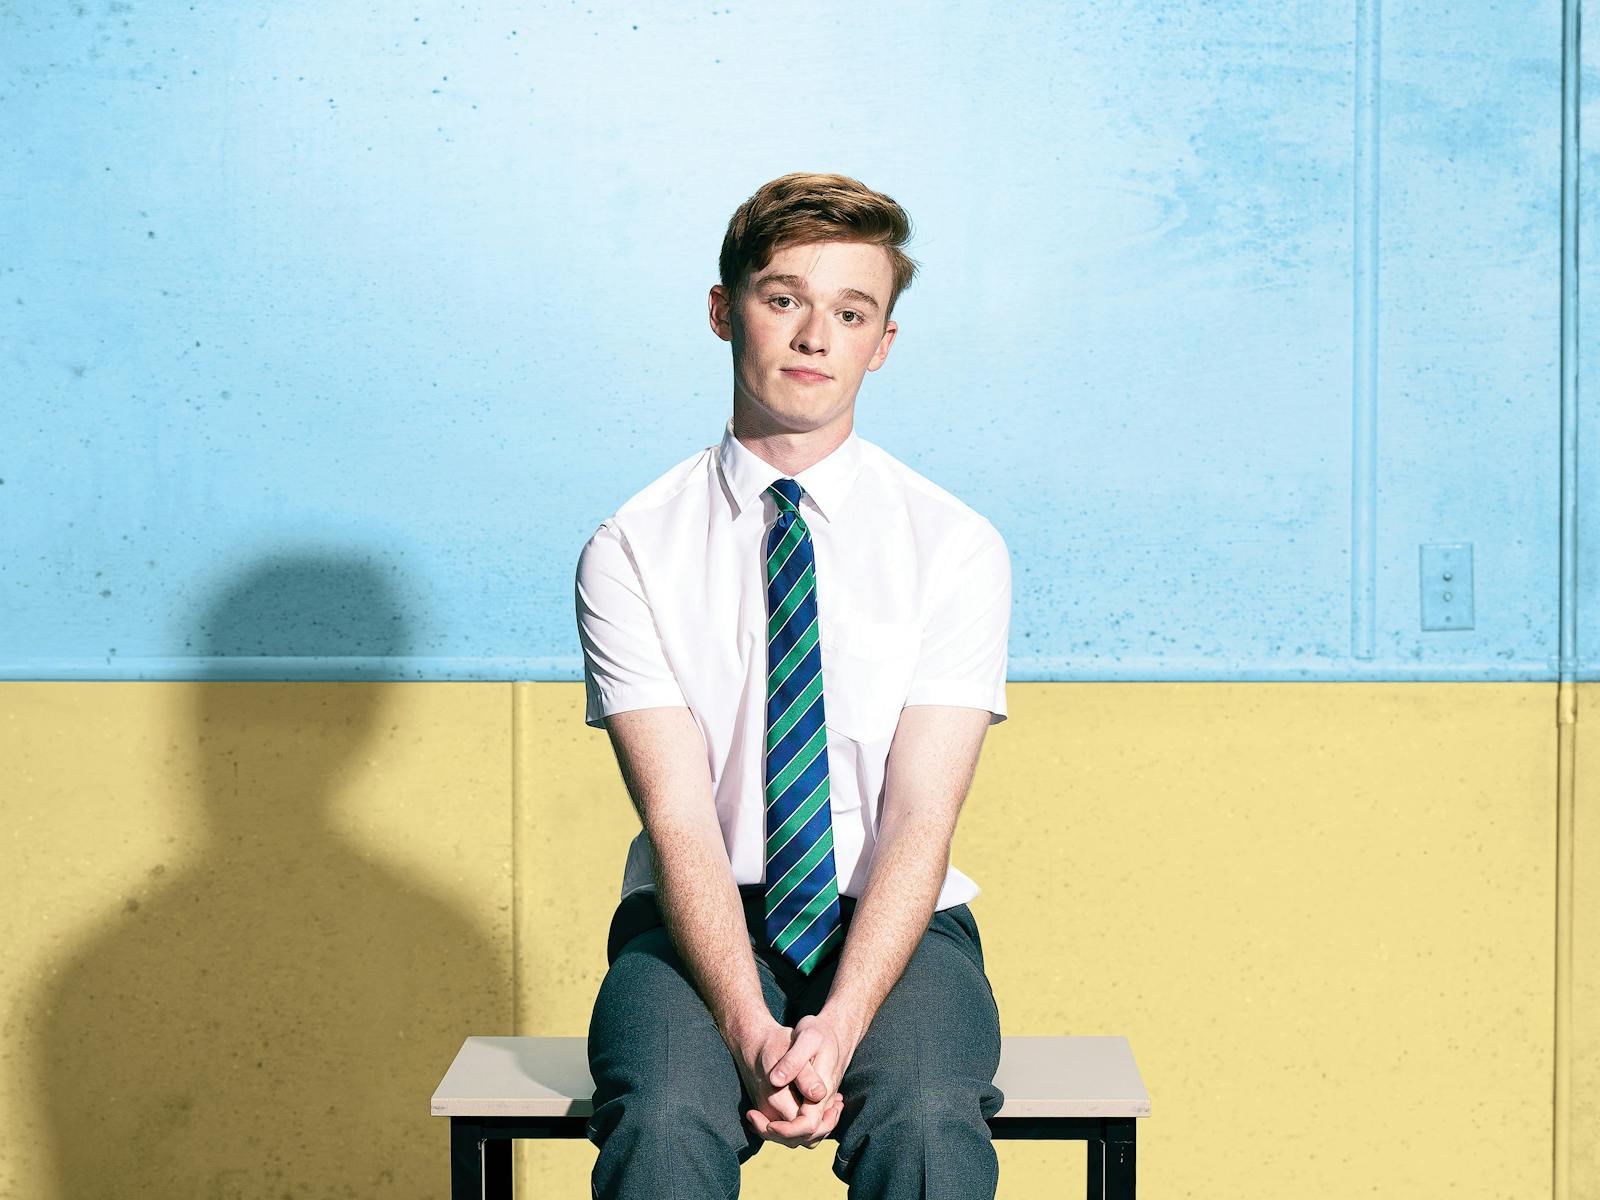 A young man in school uniform, sits on a school desk, looking at the camera